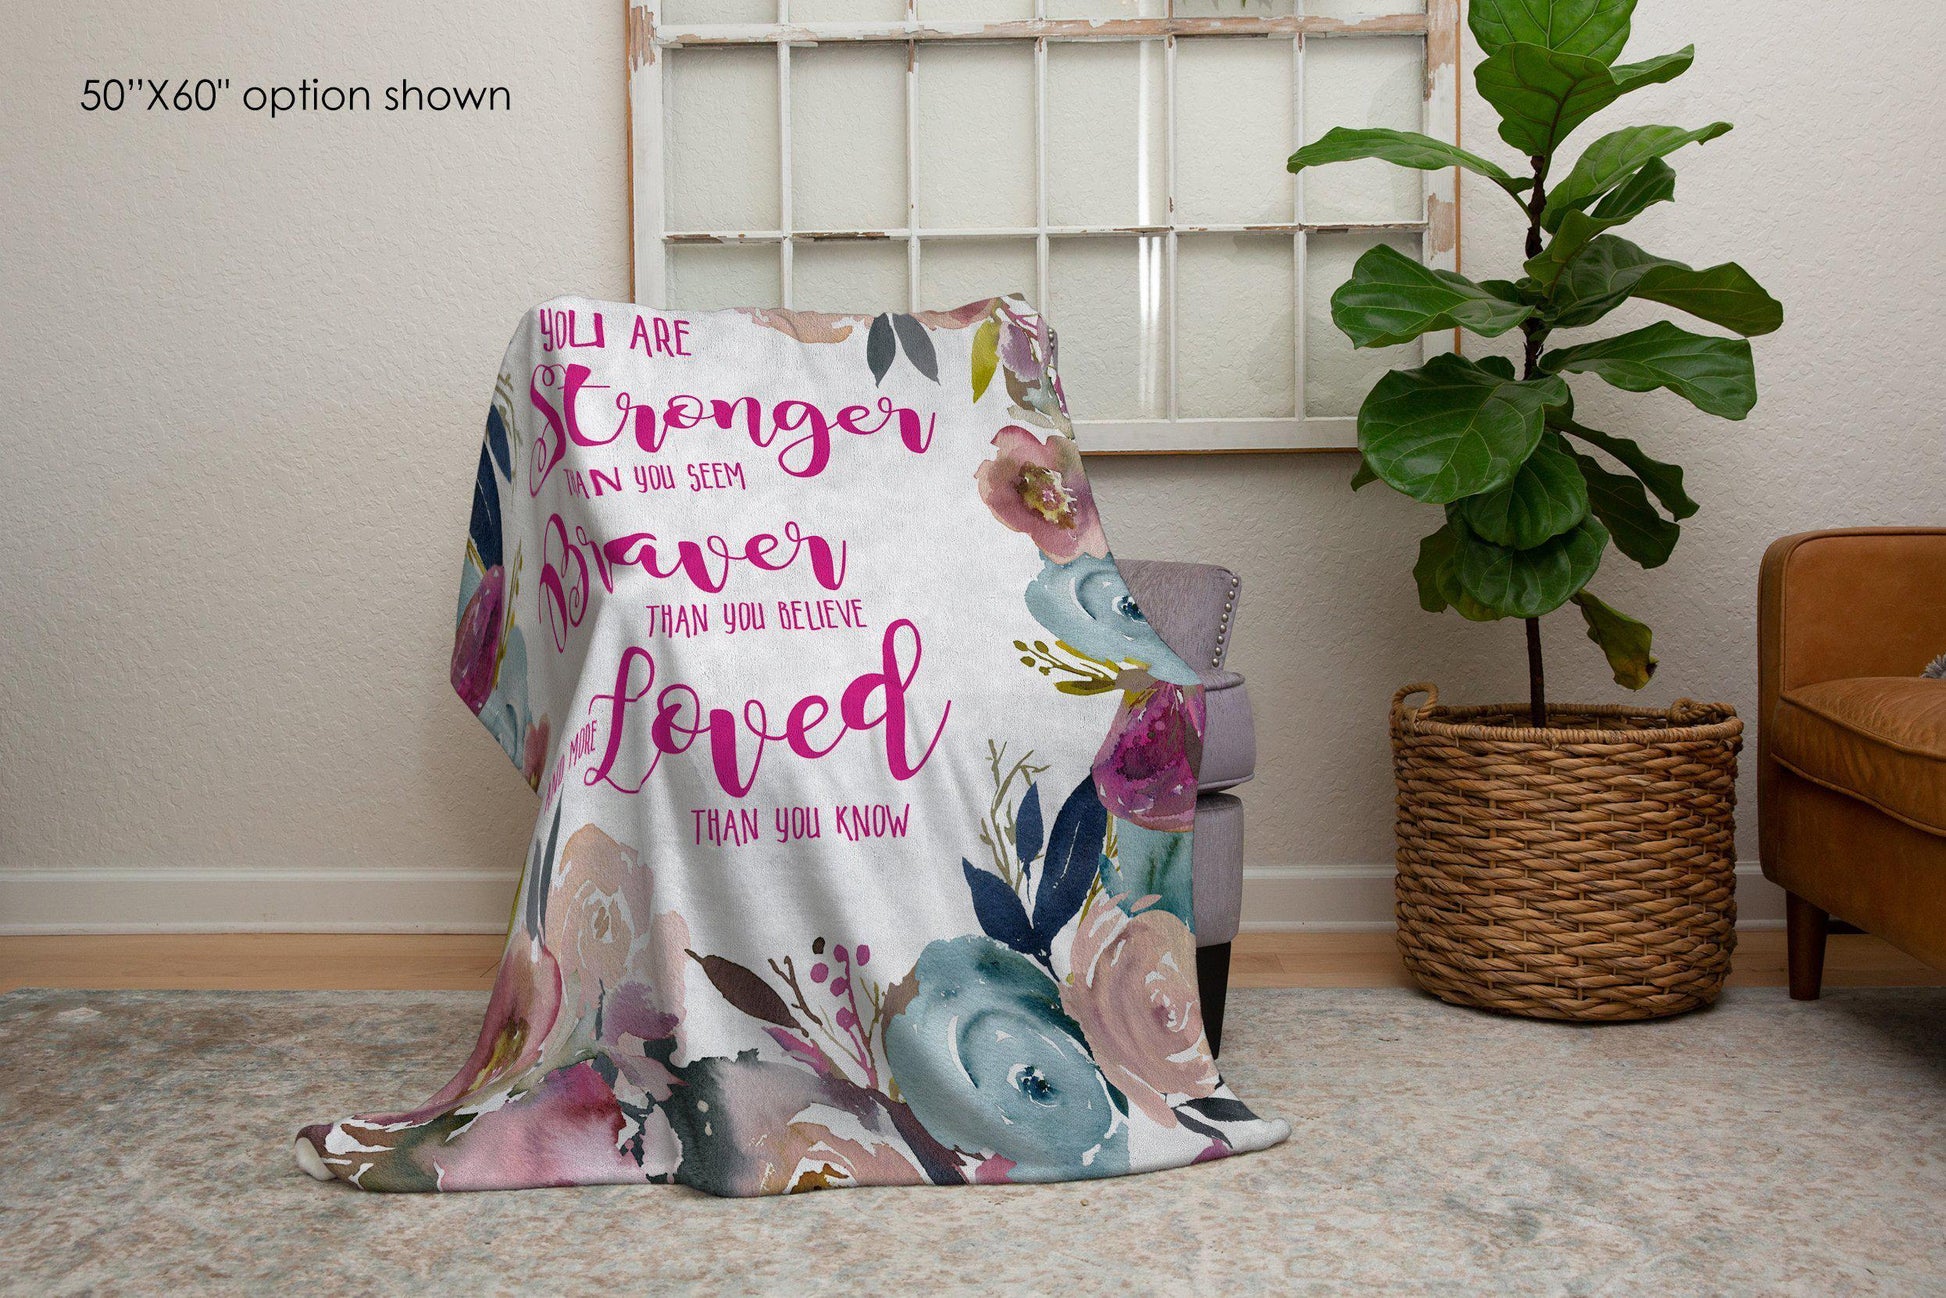 Stronger Braver More Loved Than You Know Floral Inspirational Quote Blanket-Luxe Palette